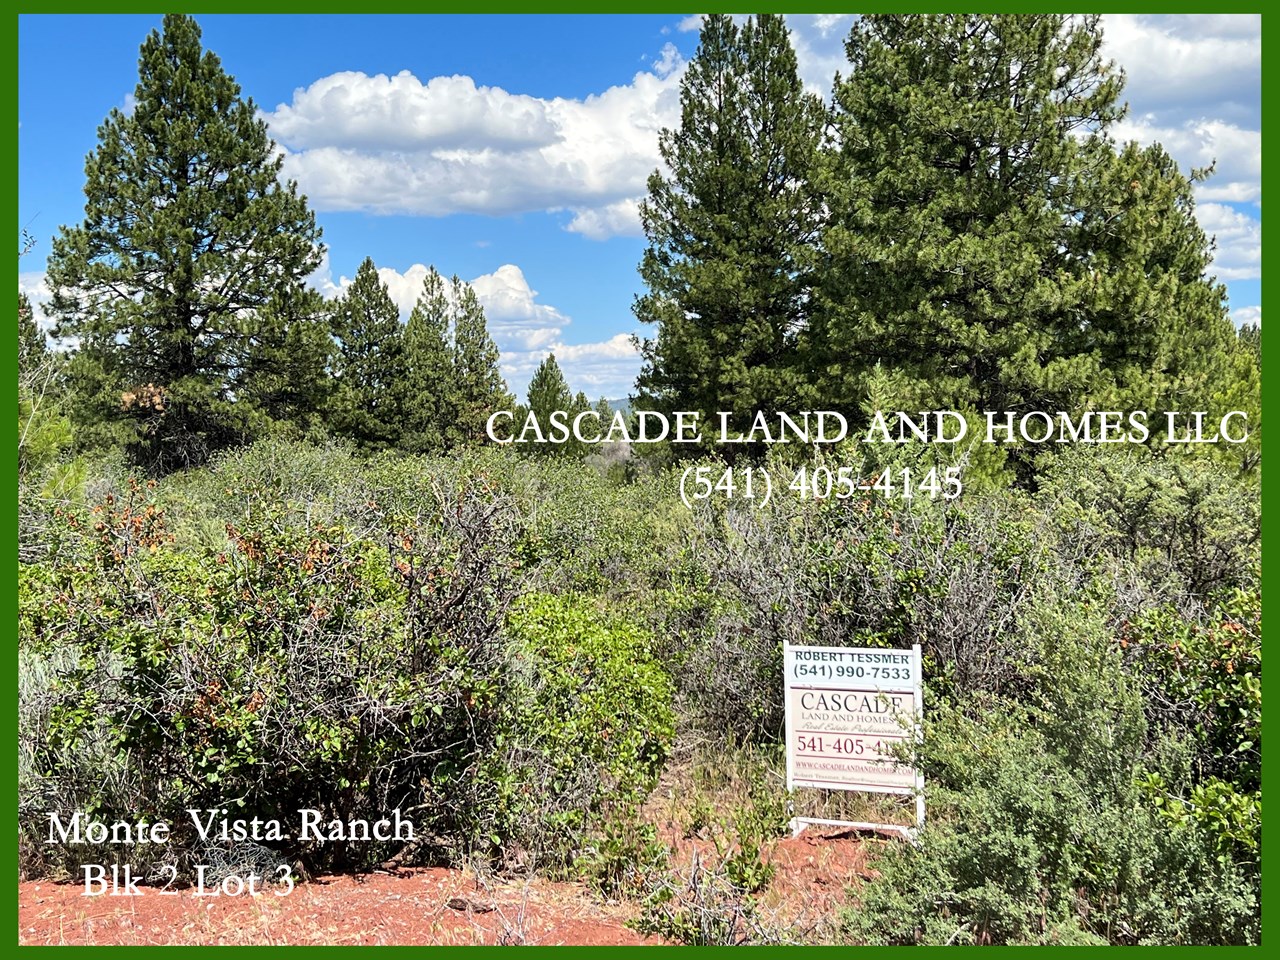 with the spectacular views, this is one of the most desirable lots in the subdivision.